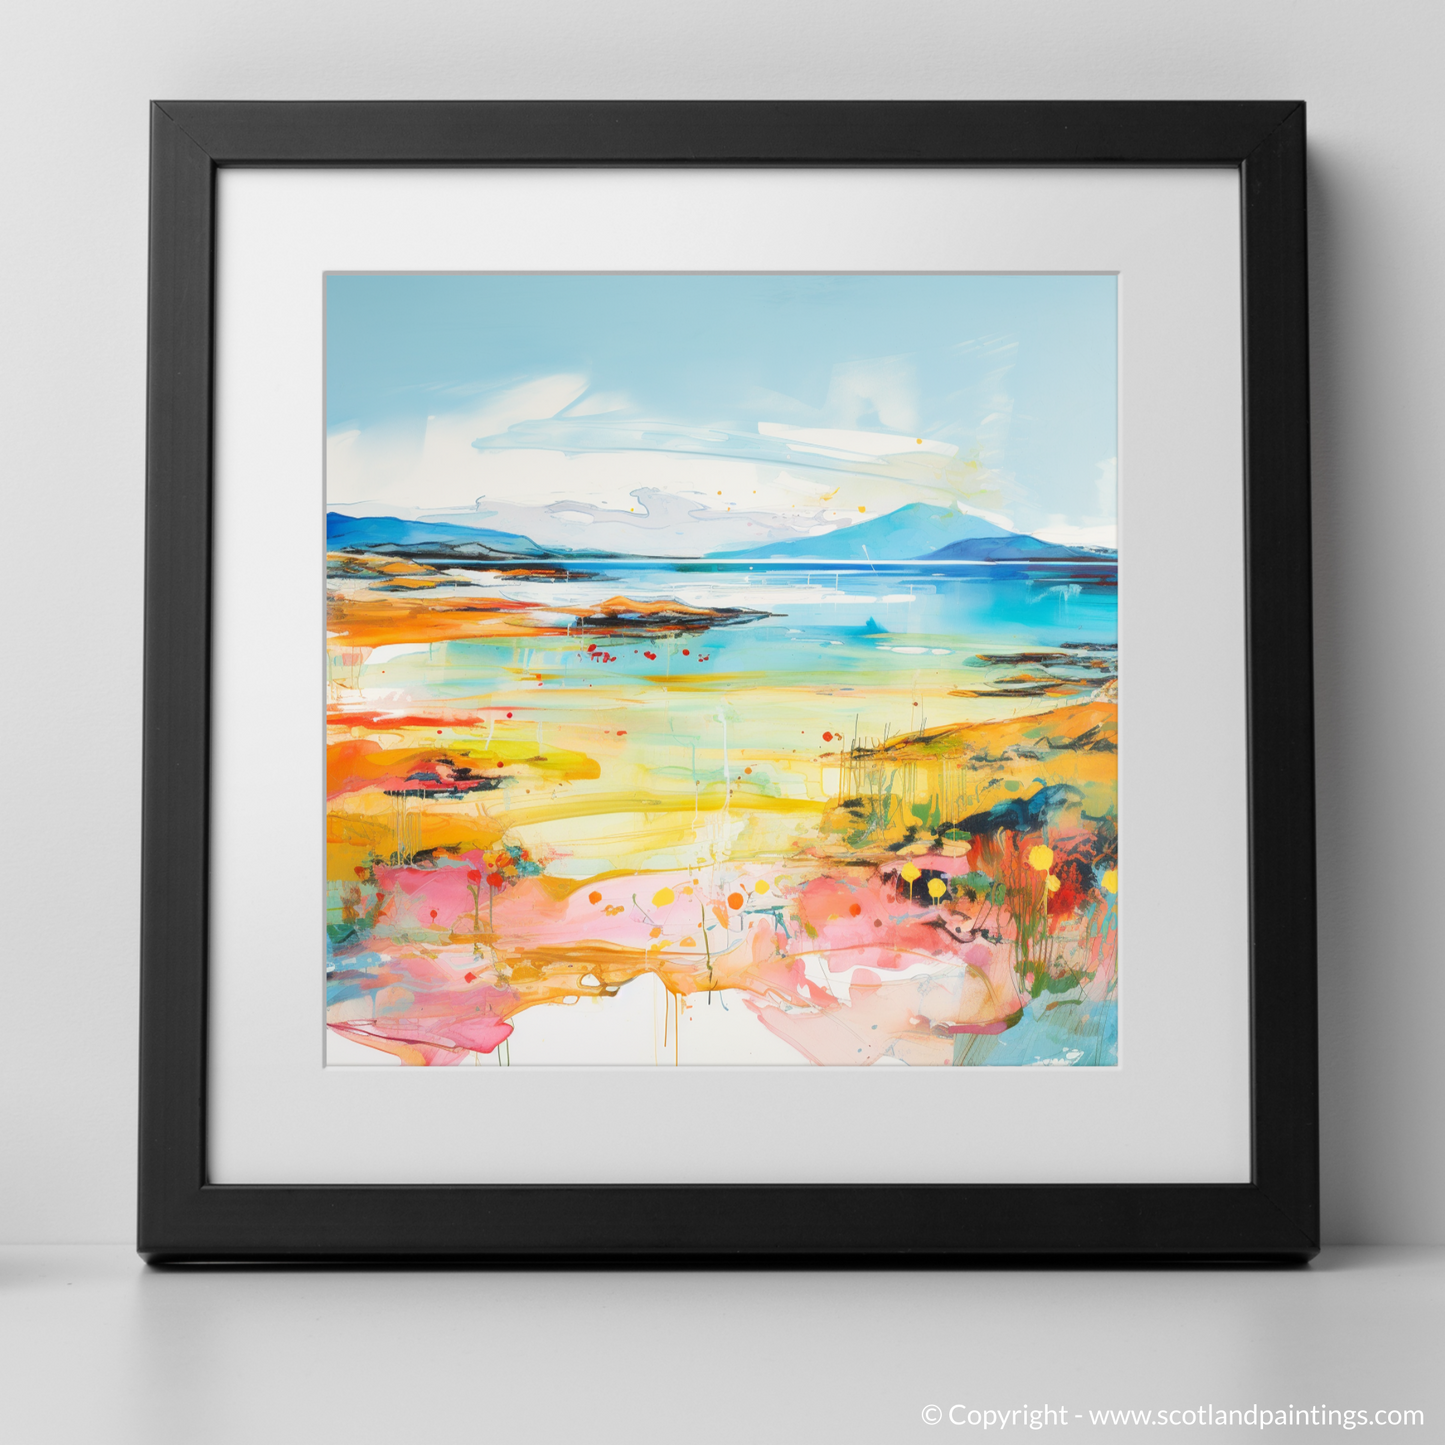 Art Print of Isle of Gigha, Inner Hebrides in summer with a black frame